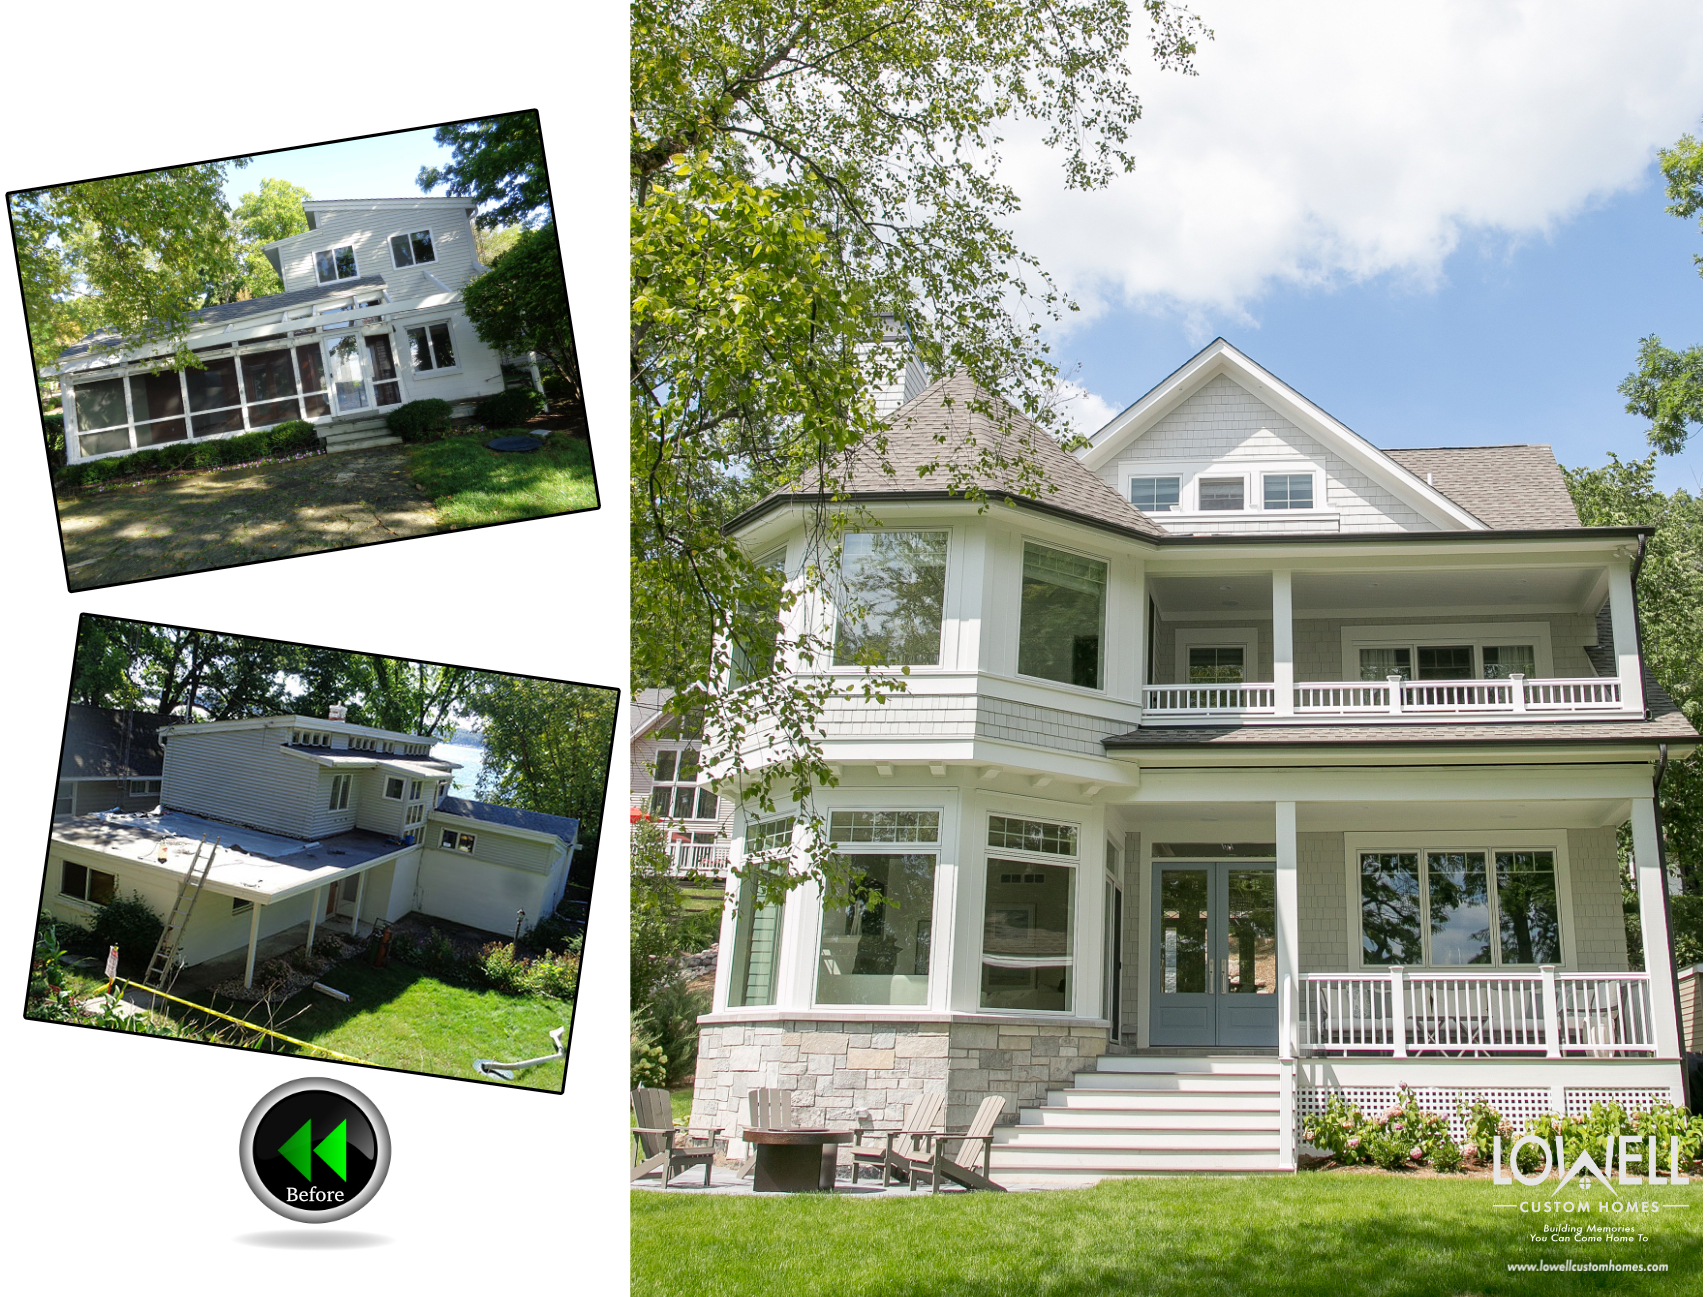 Before and After original lake home tear down for new home by Lowell Custom Homes Lake Geneva WI